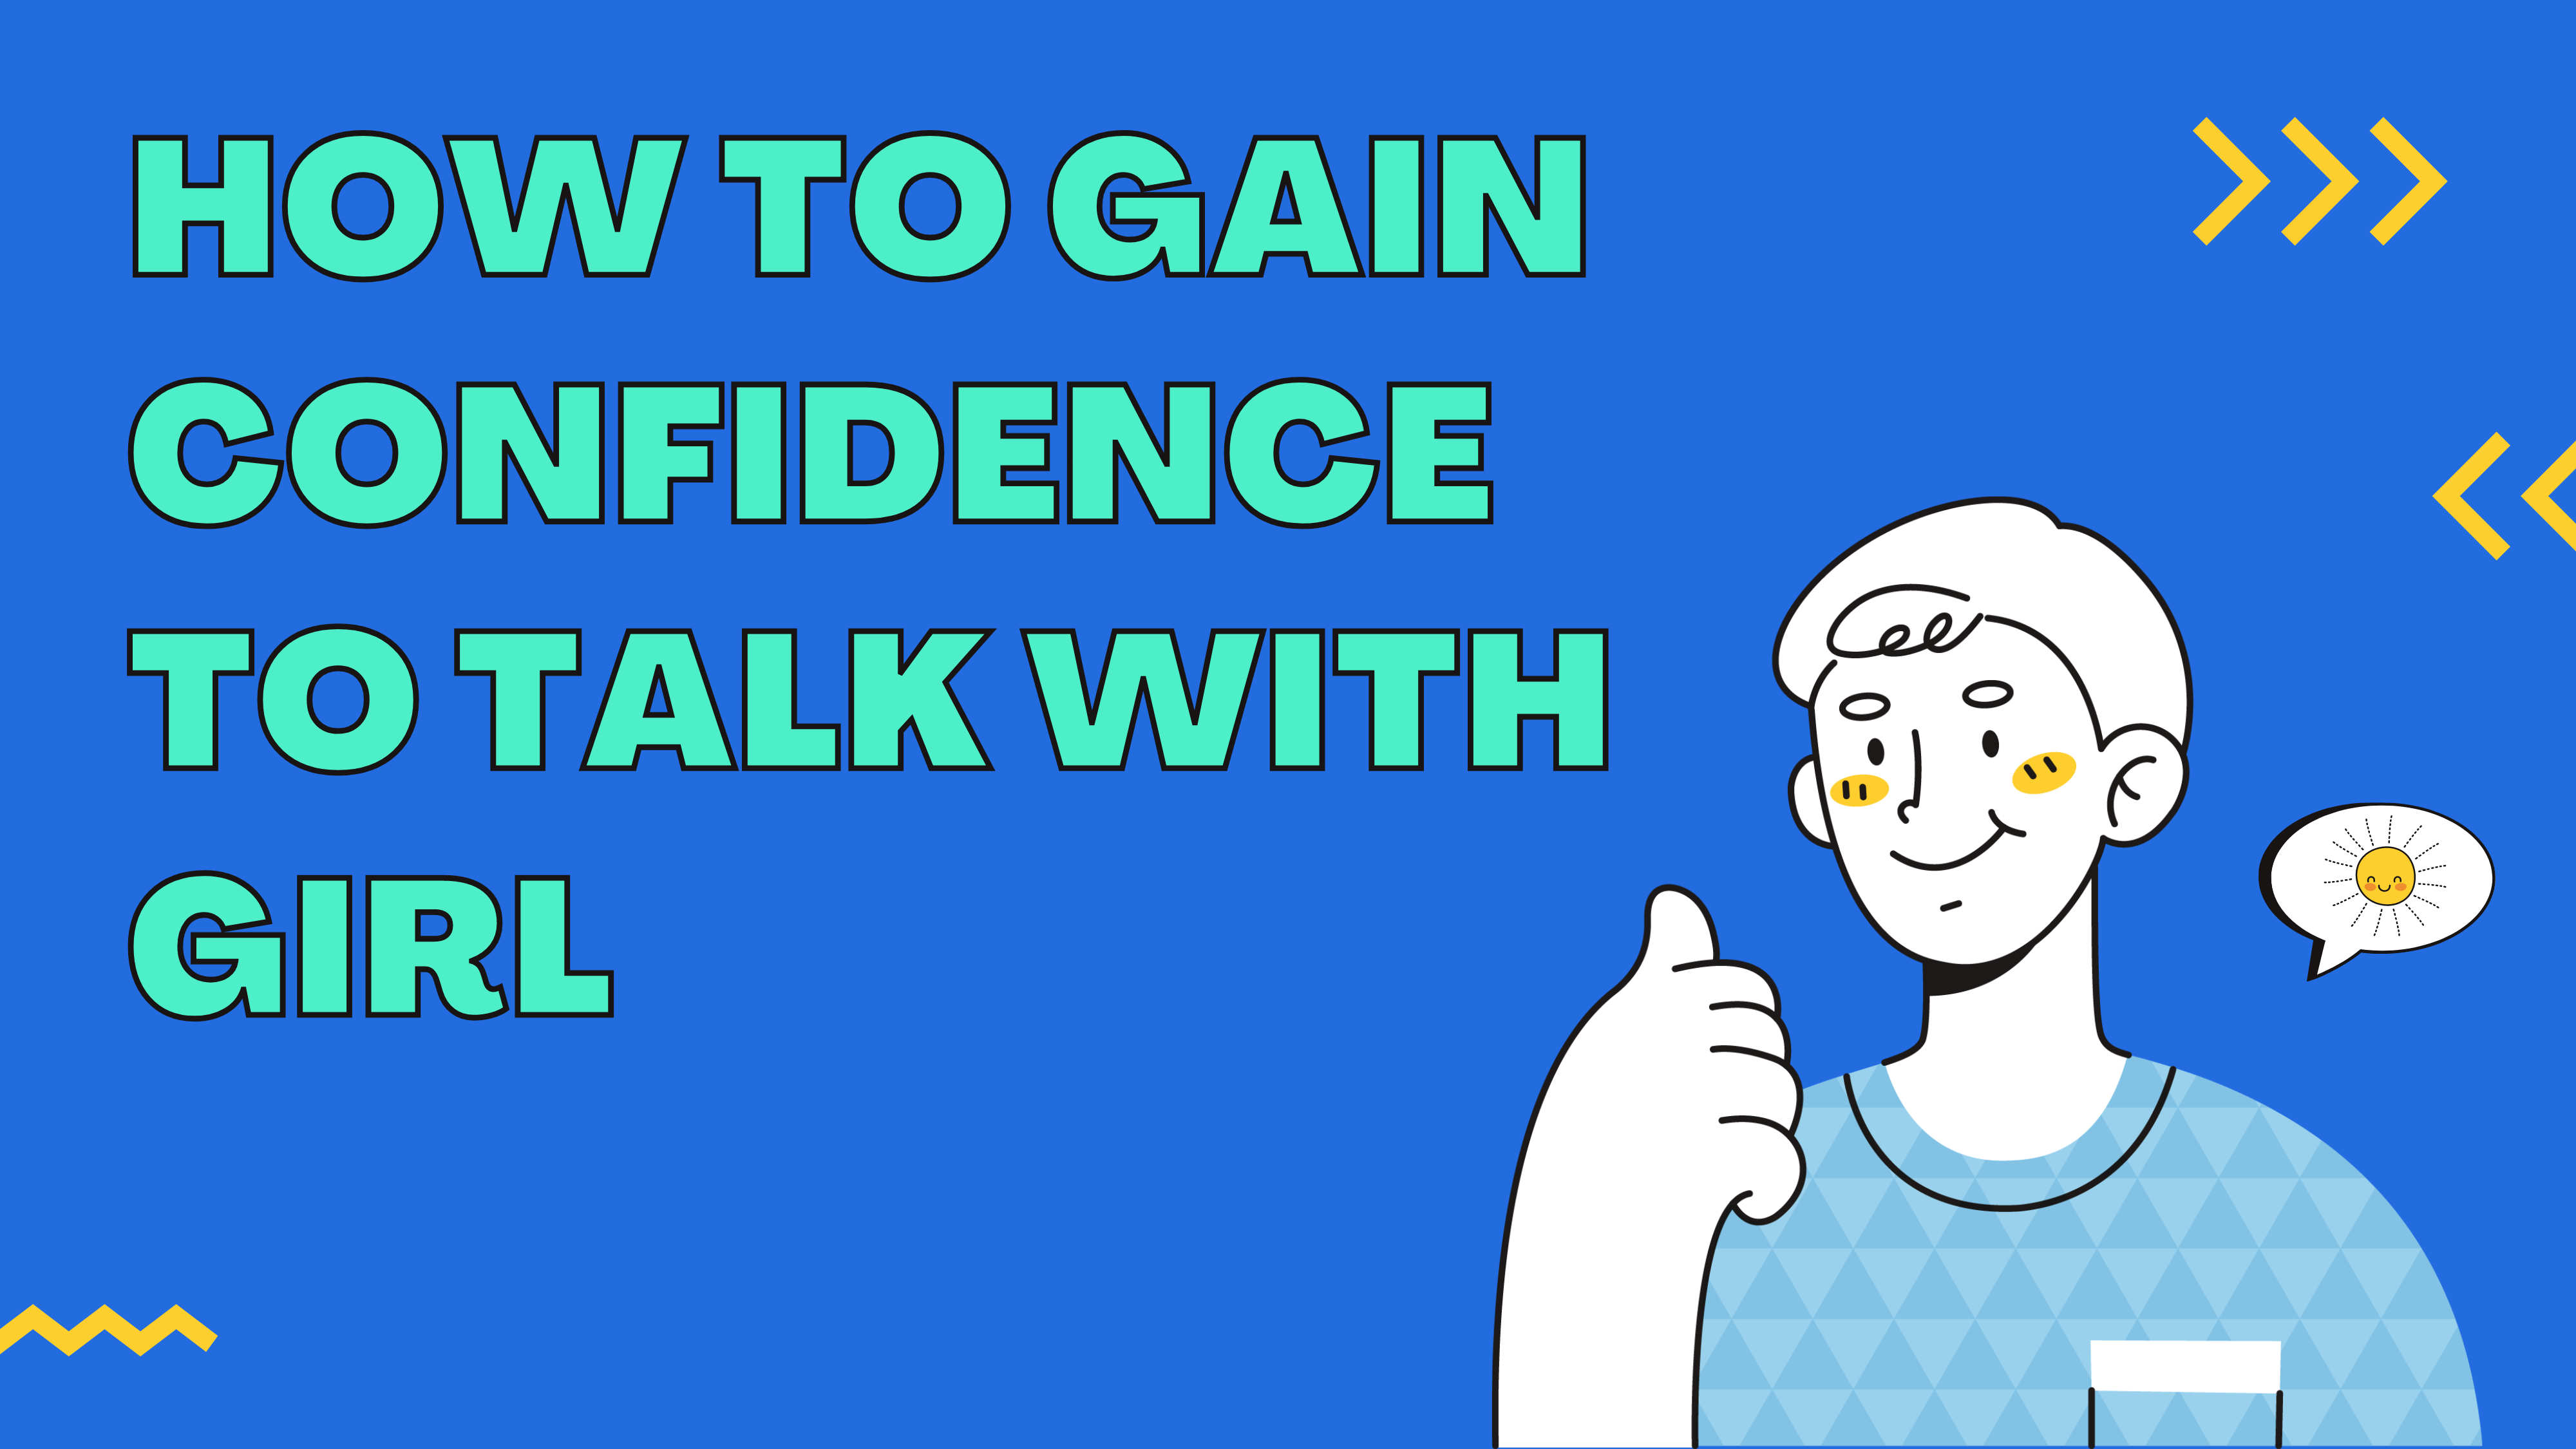 How to gain confidence to talk with girl